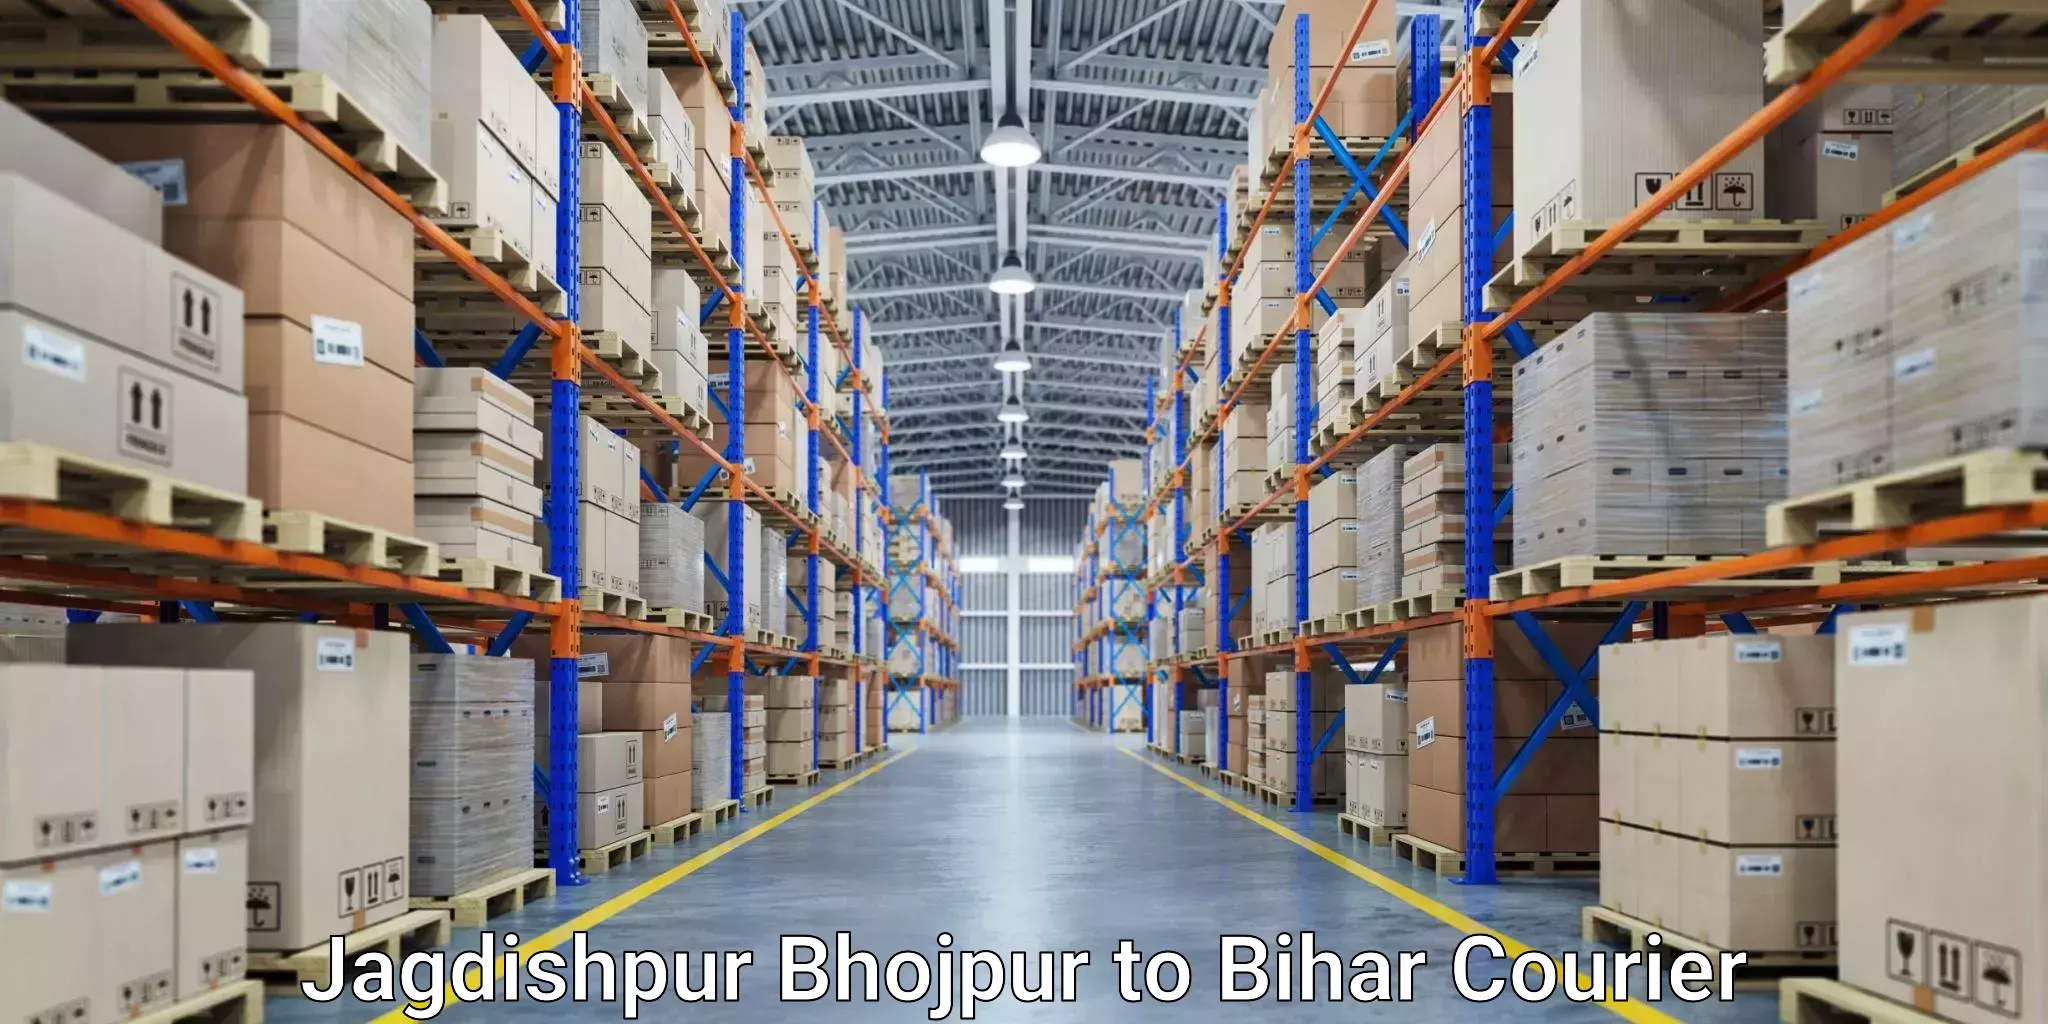 State-of-the-art courier technology Jagdishpur Bhojpur to Bihar